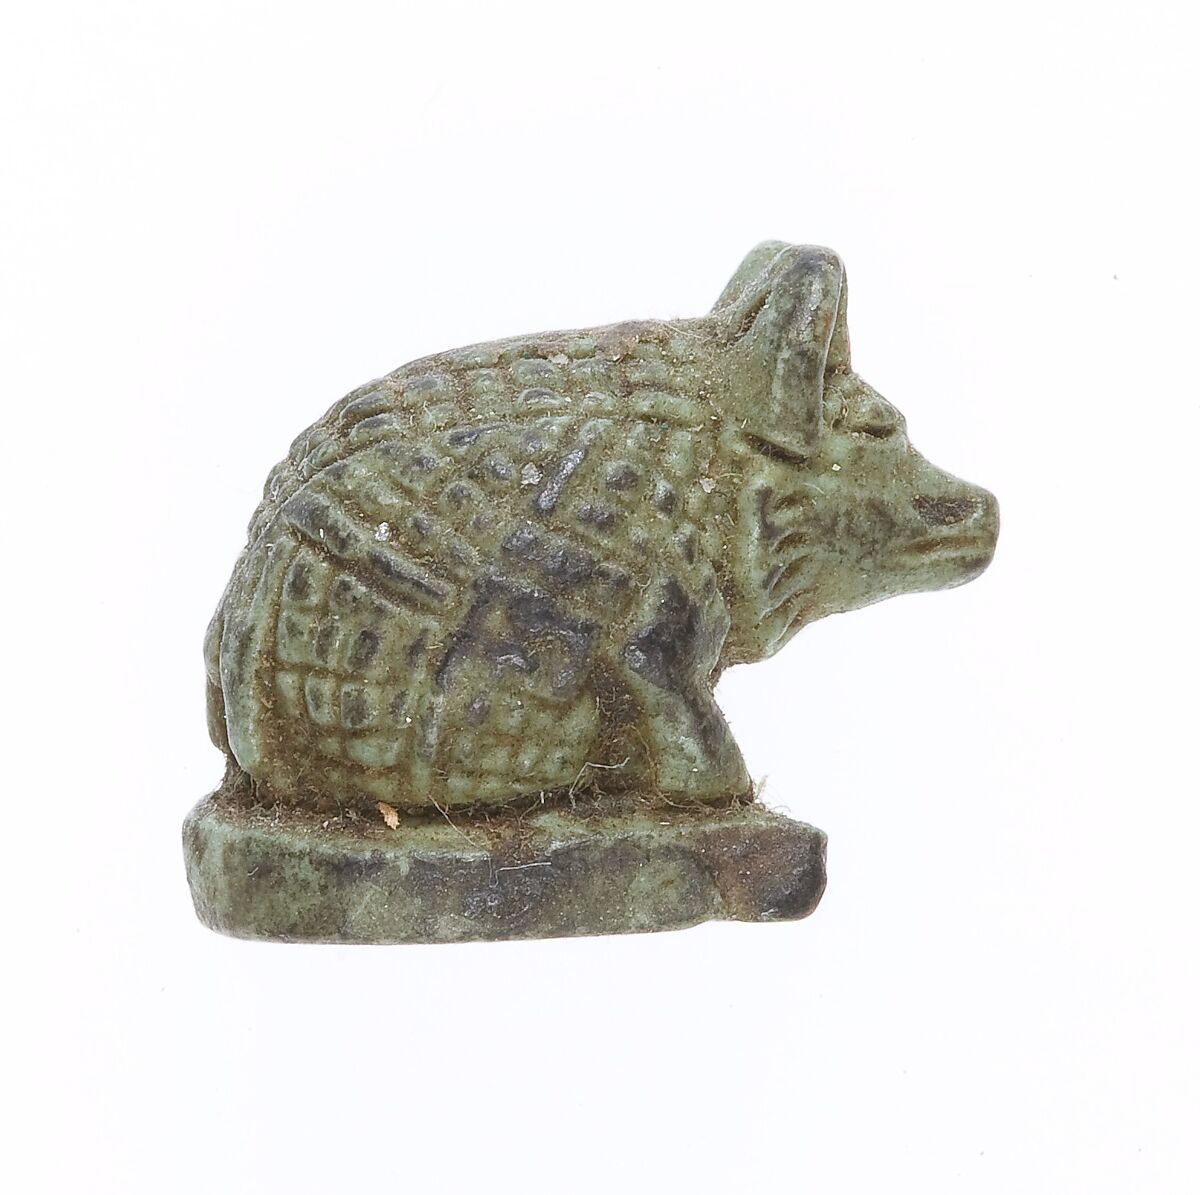 Seal amulet in the shape of hedgehog, Faience 